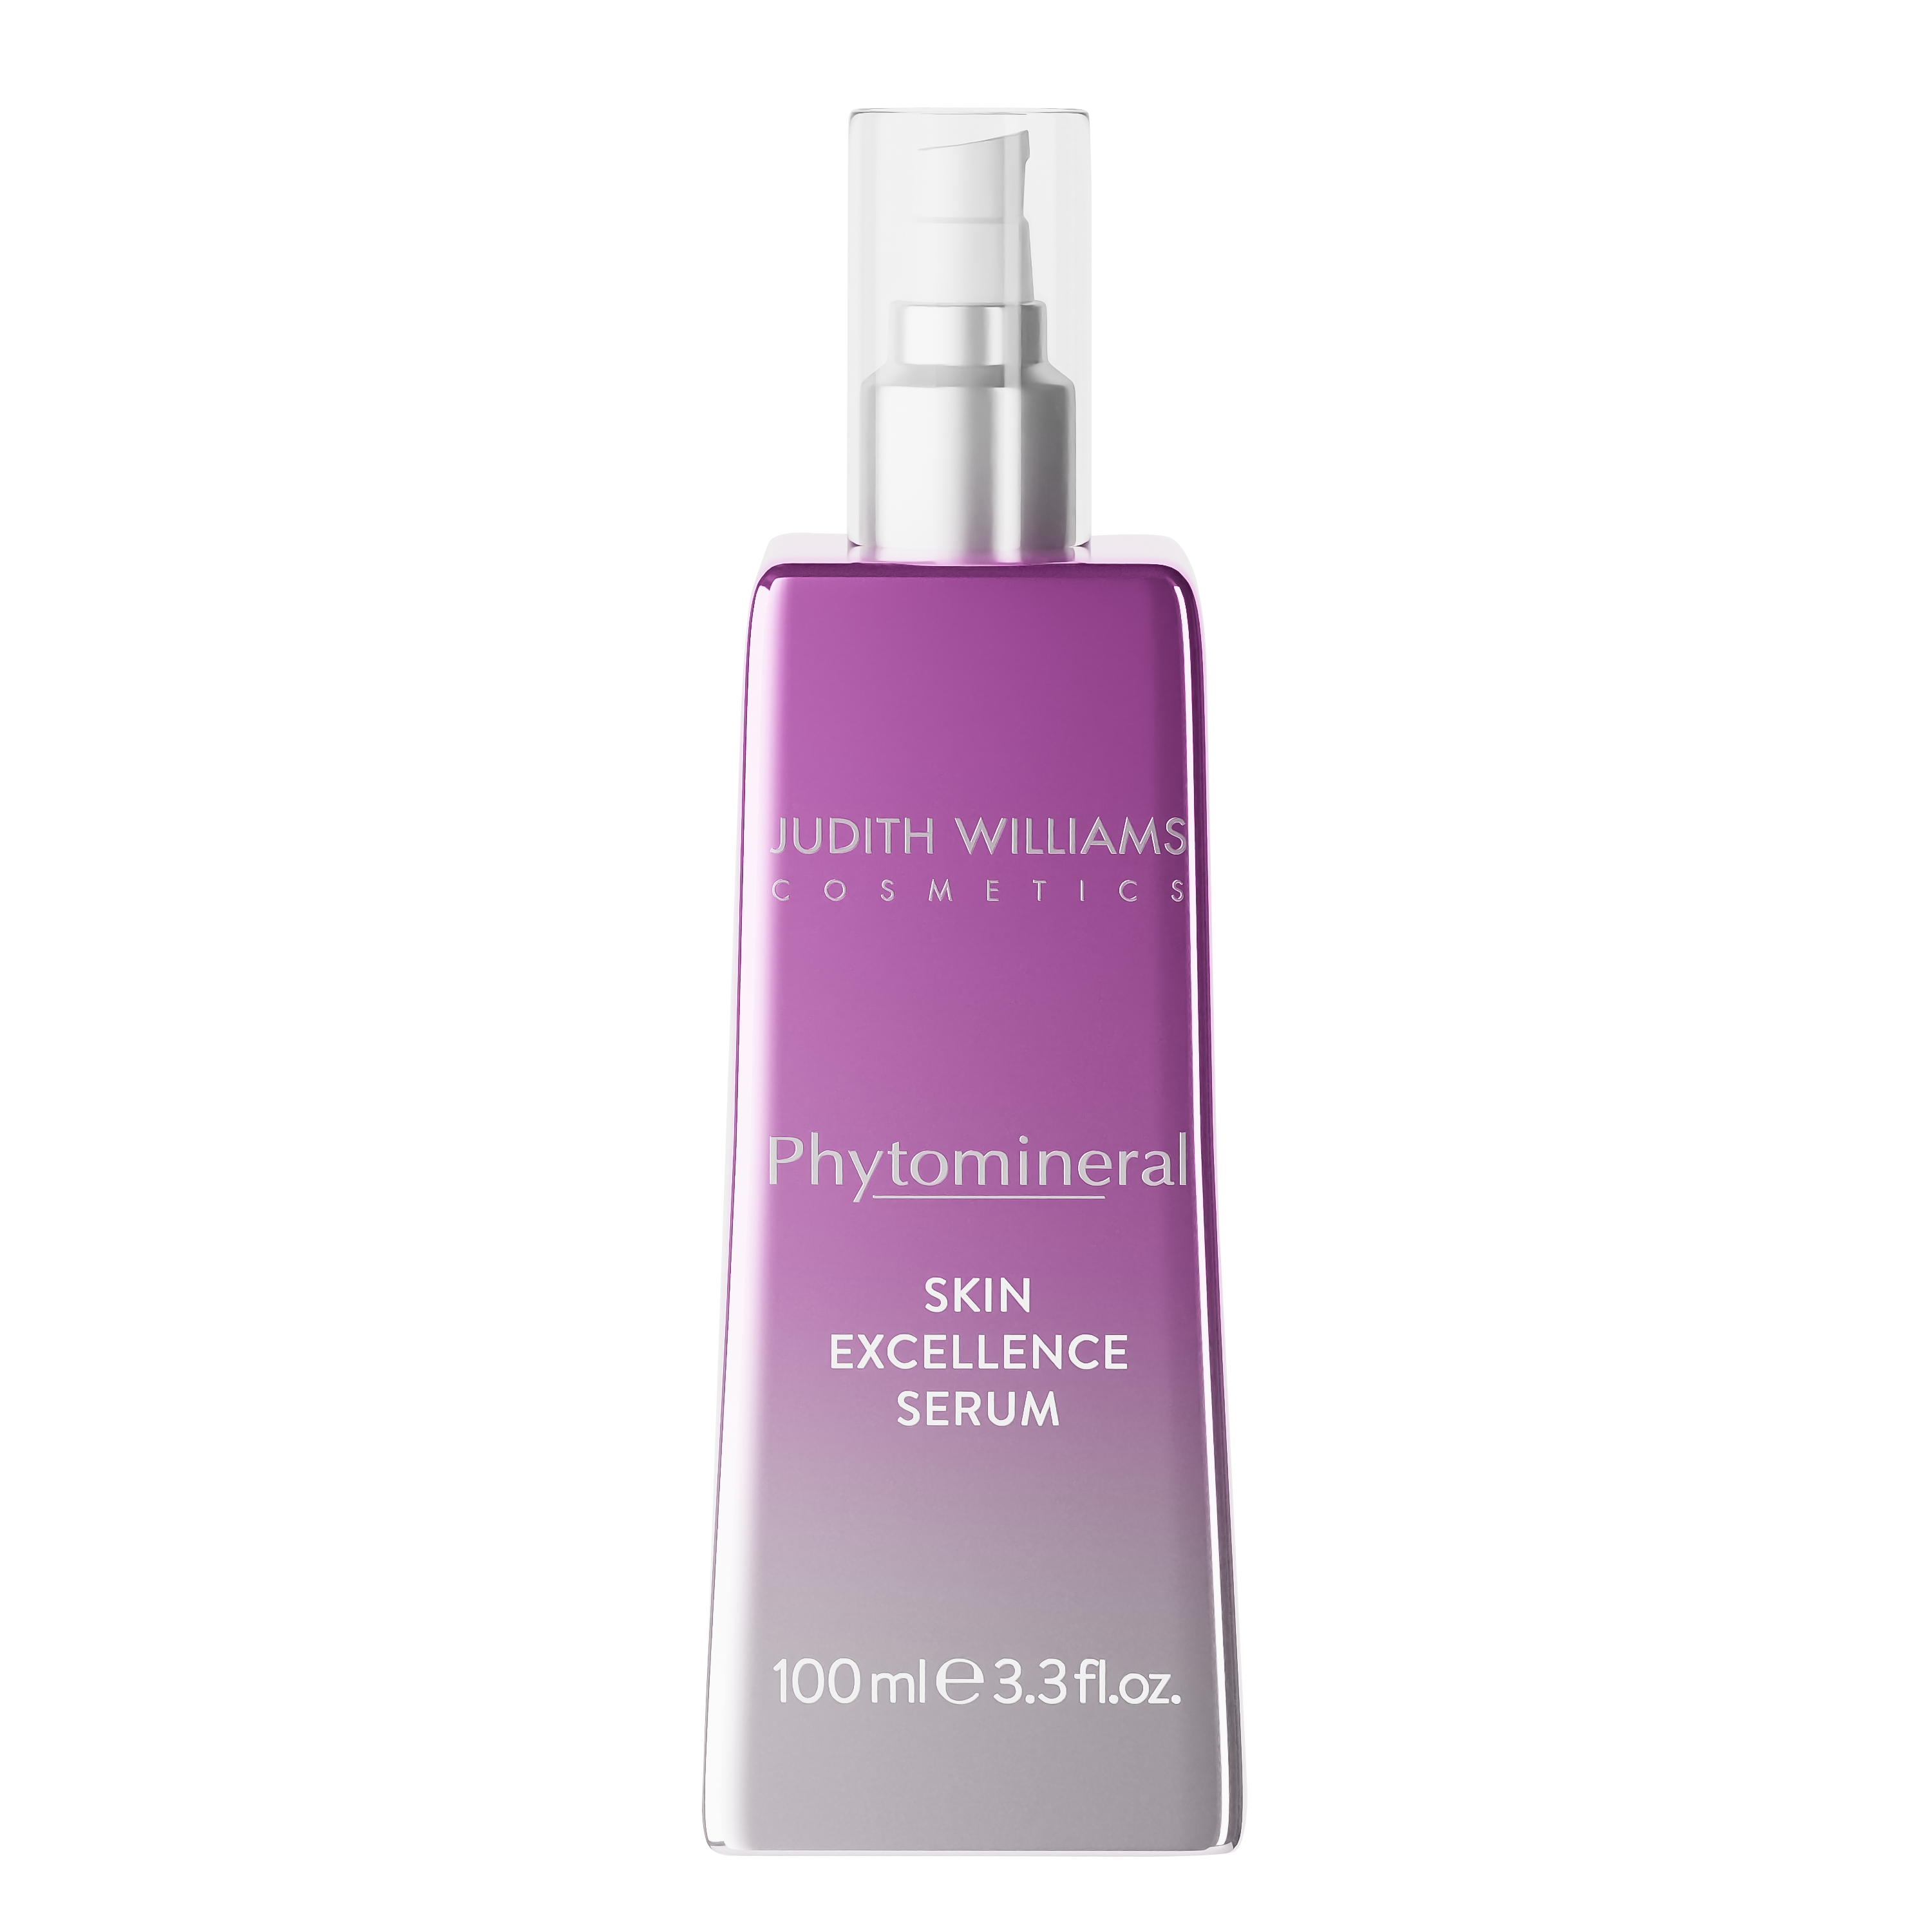 Phytomineral Skin Excellence Serum